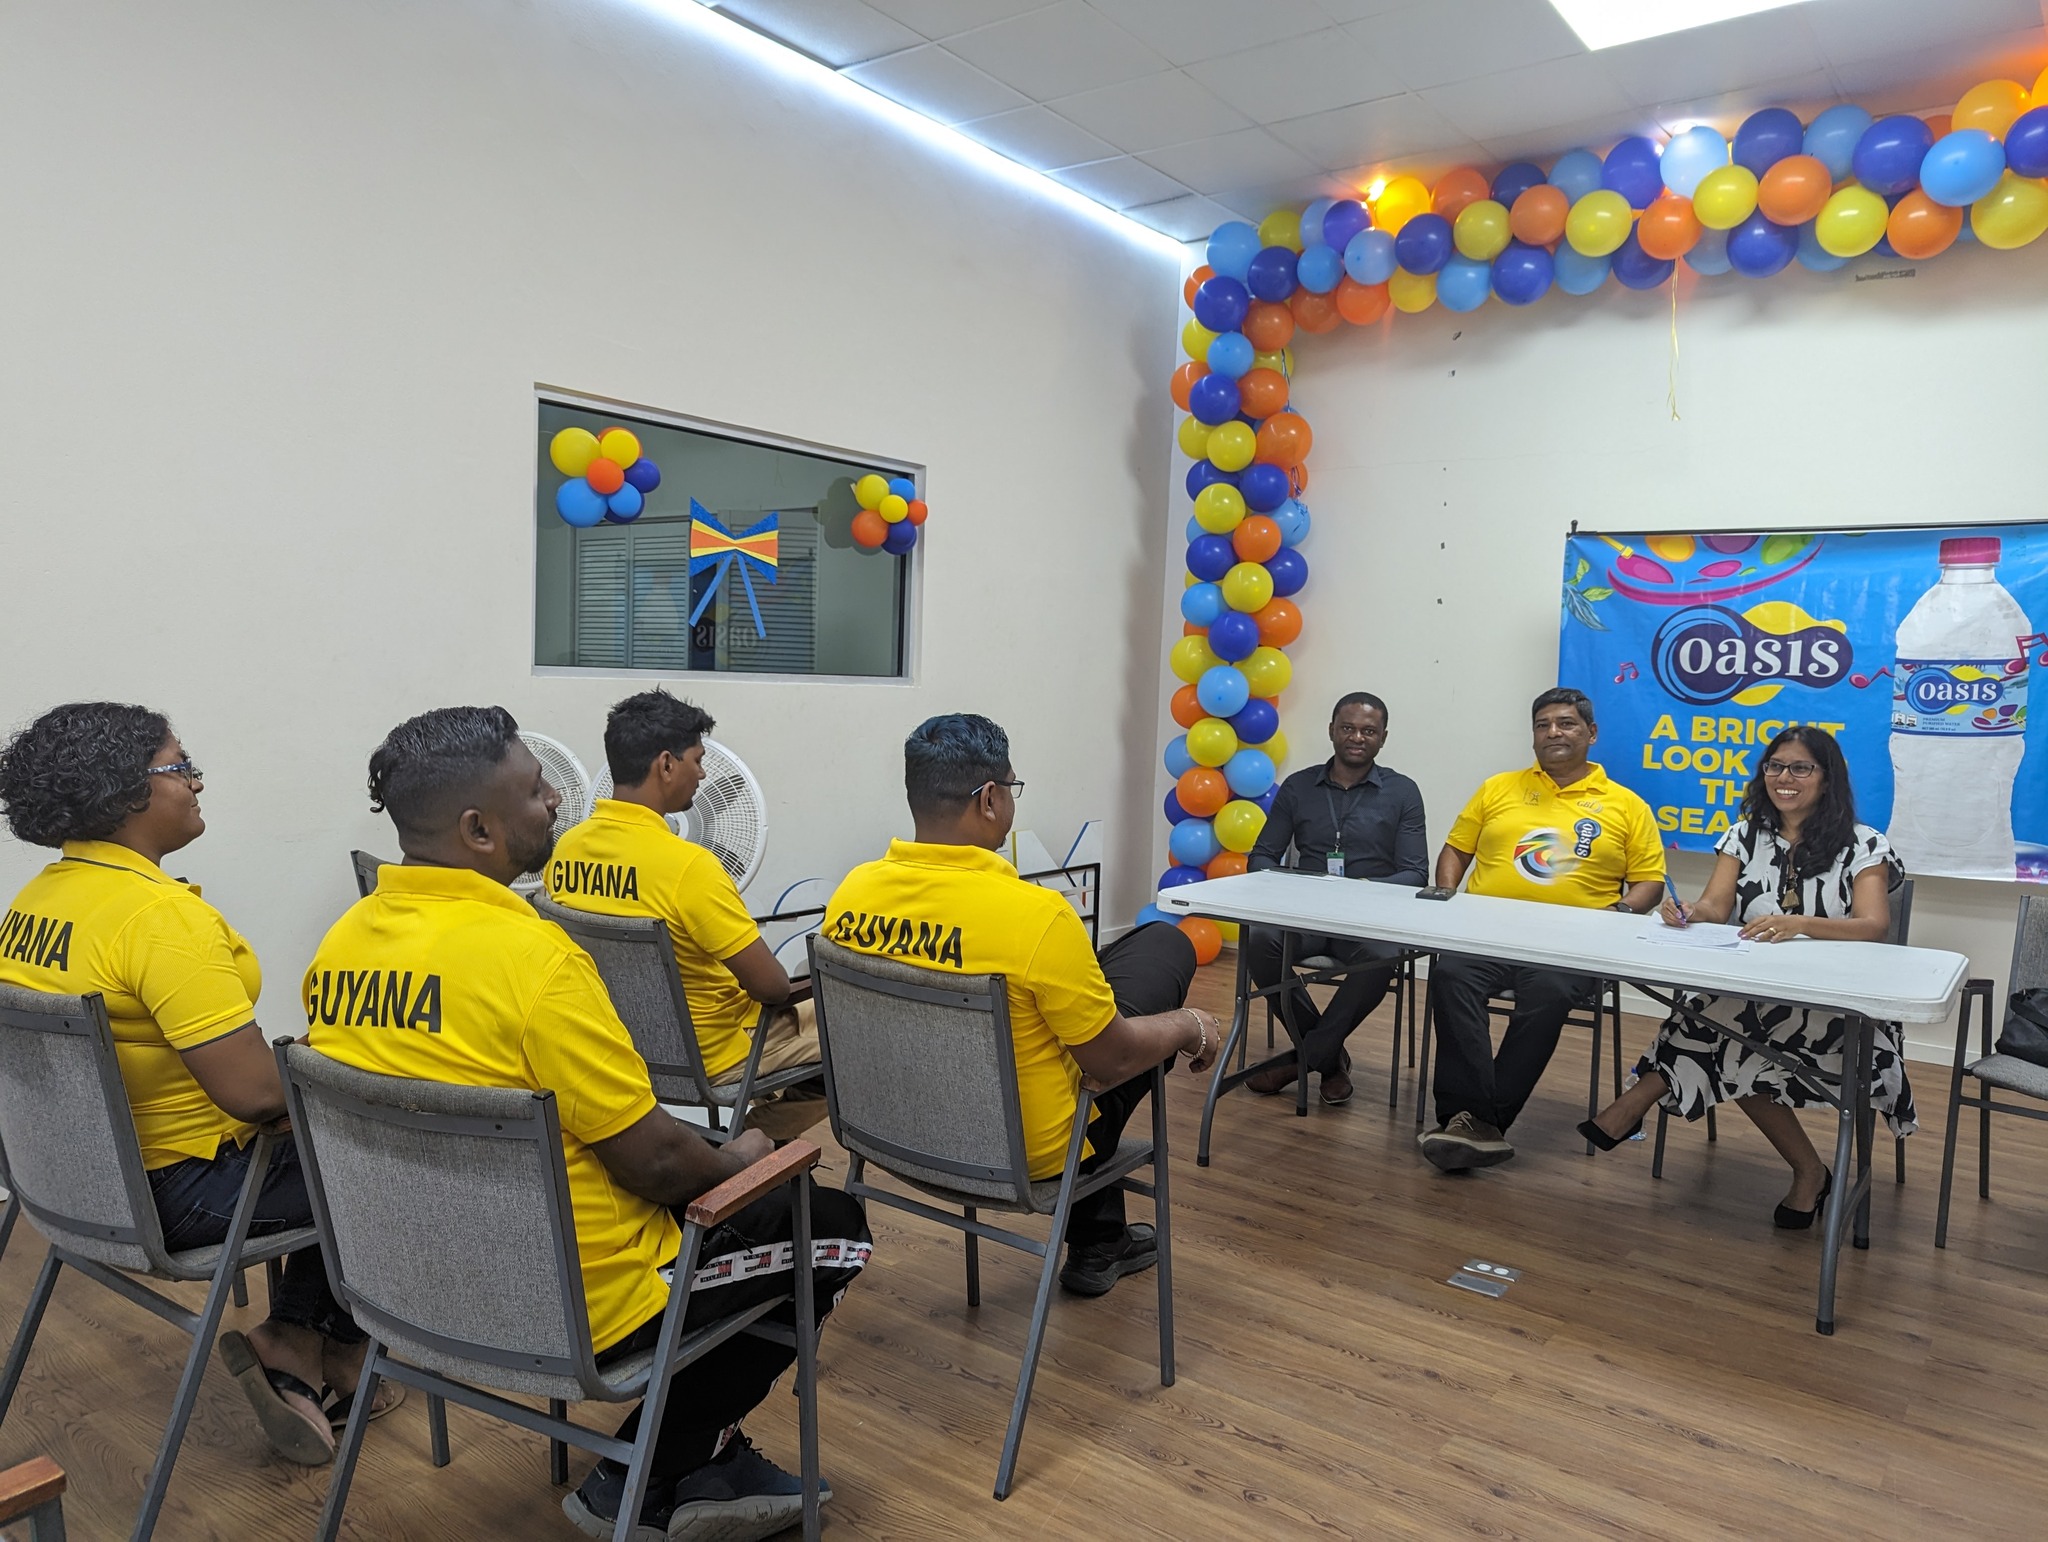 Archery Guyana sends Team to participate in the Caribbean Development Championships